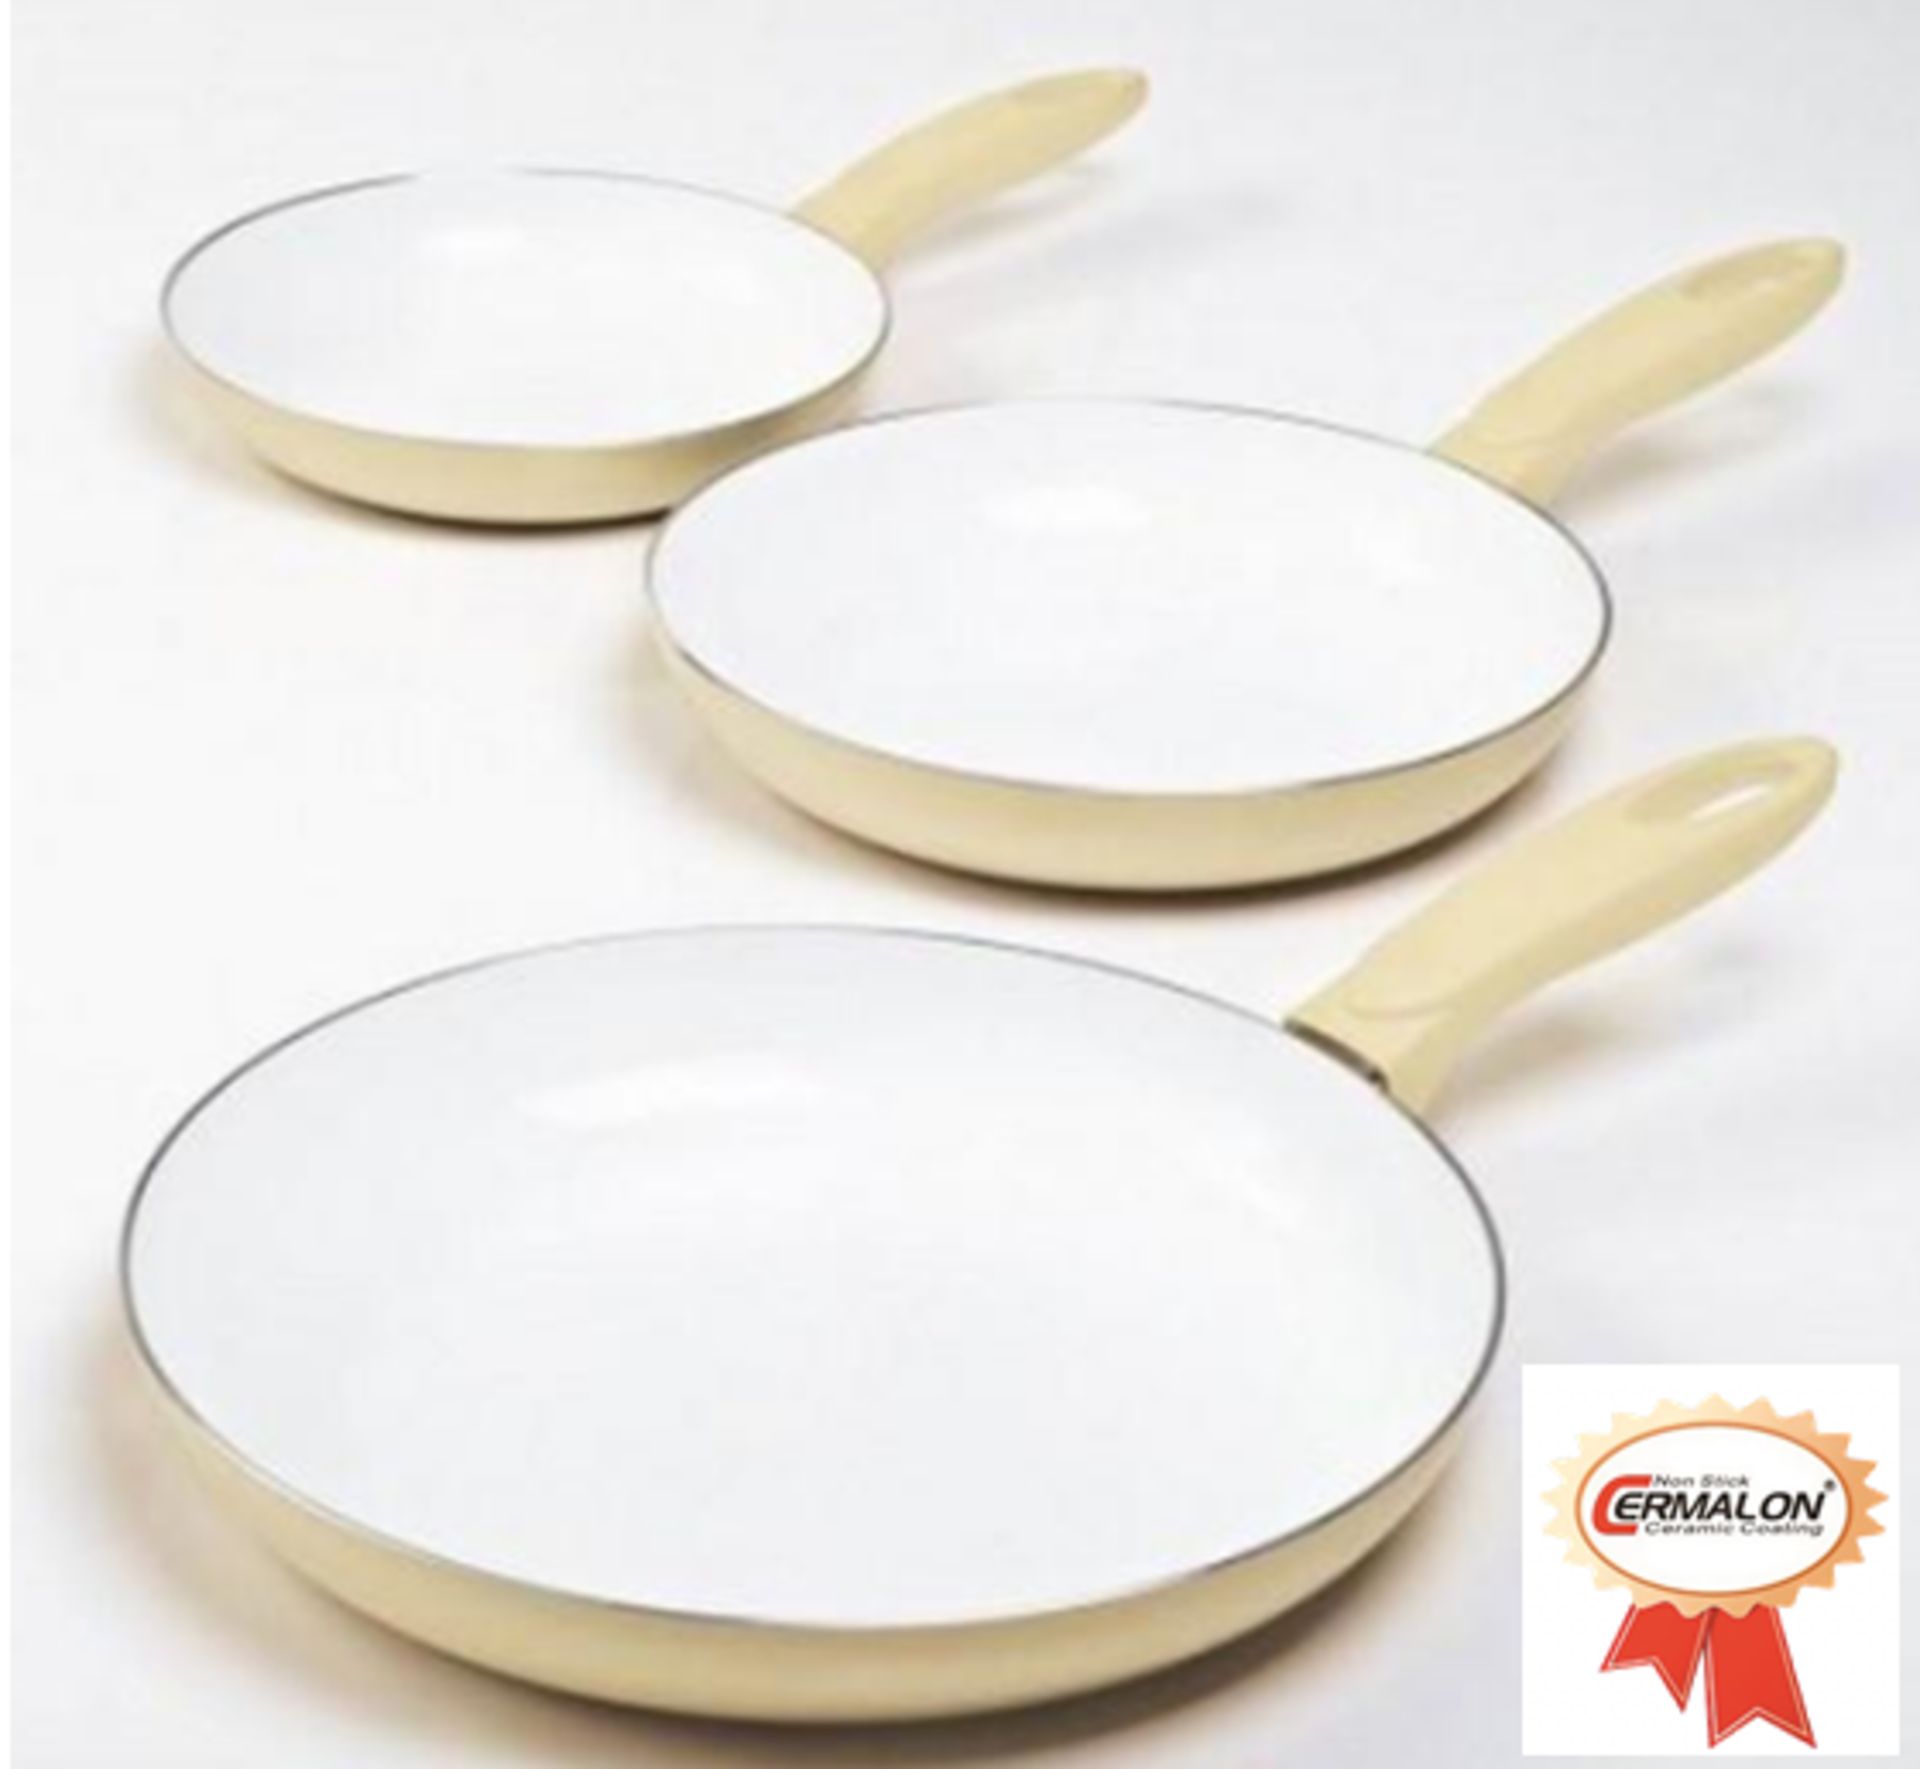 V Brand New K104 / 3 PIECE CERAMIC FRYING PANS ARE EXTRAORDINARILY DURABLE, NON-STICK PANS, ALLOWING